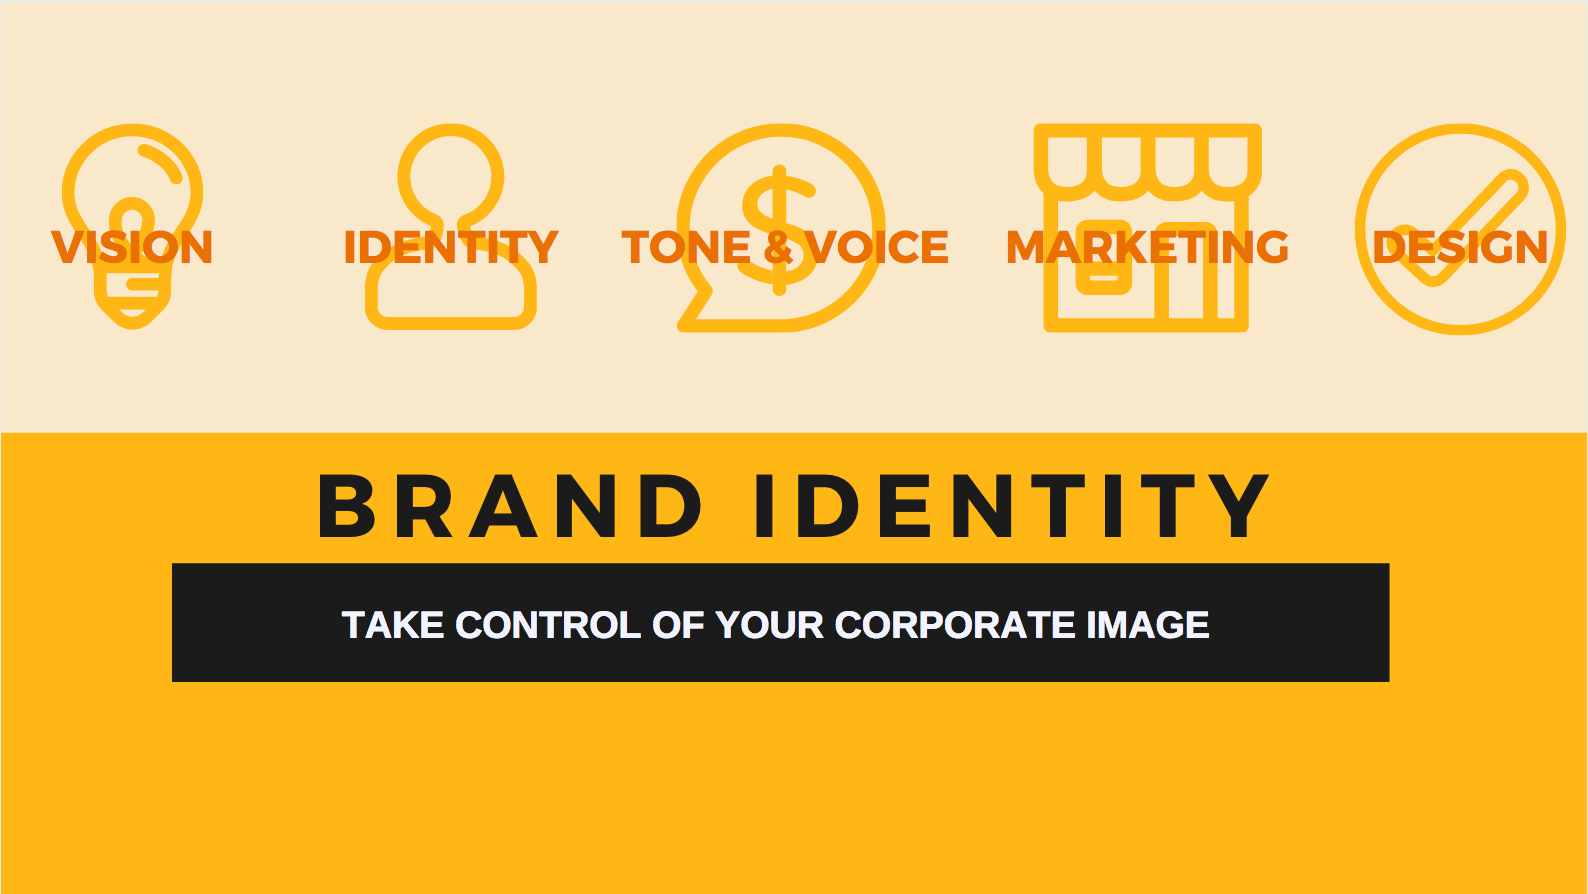 Online Branding Identification and Image: What Makes it so Important?